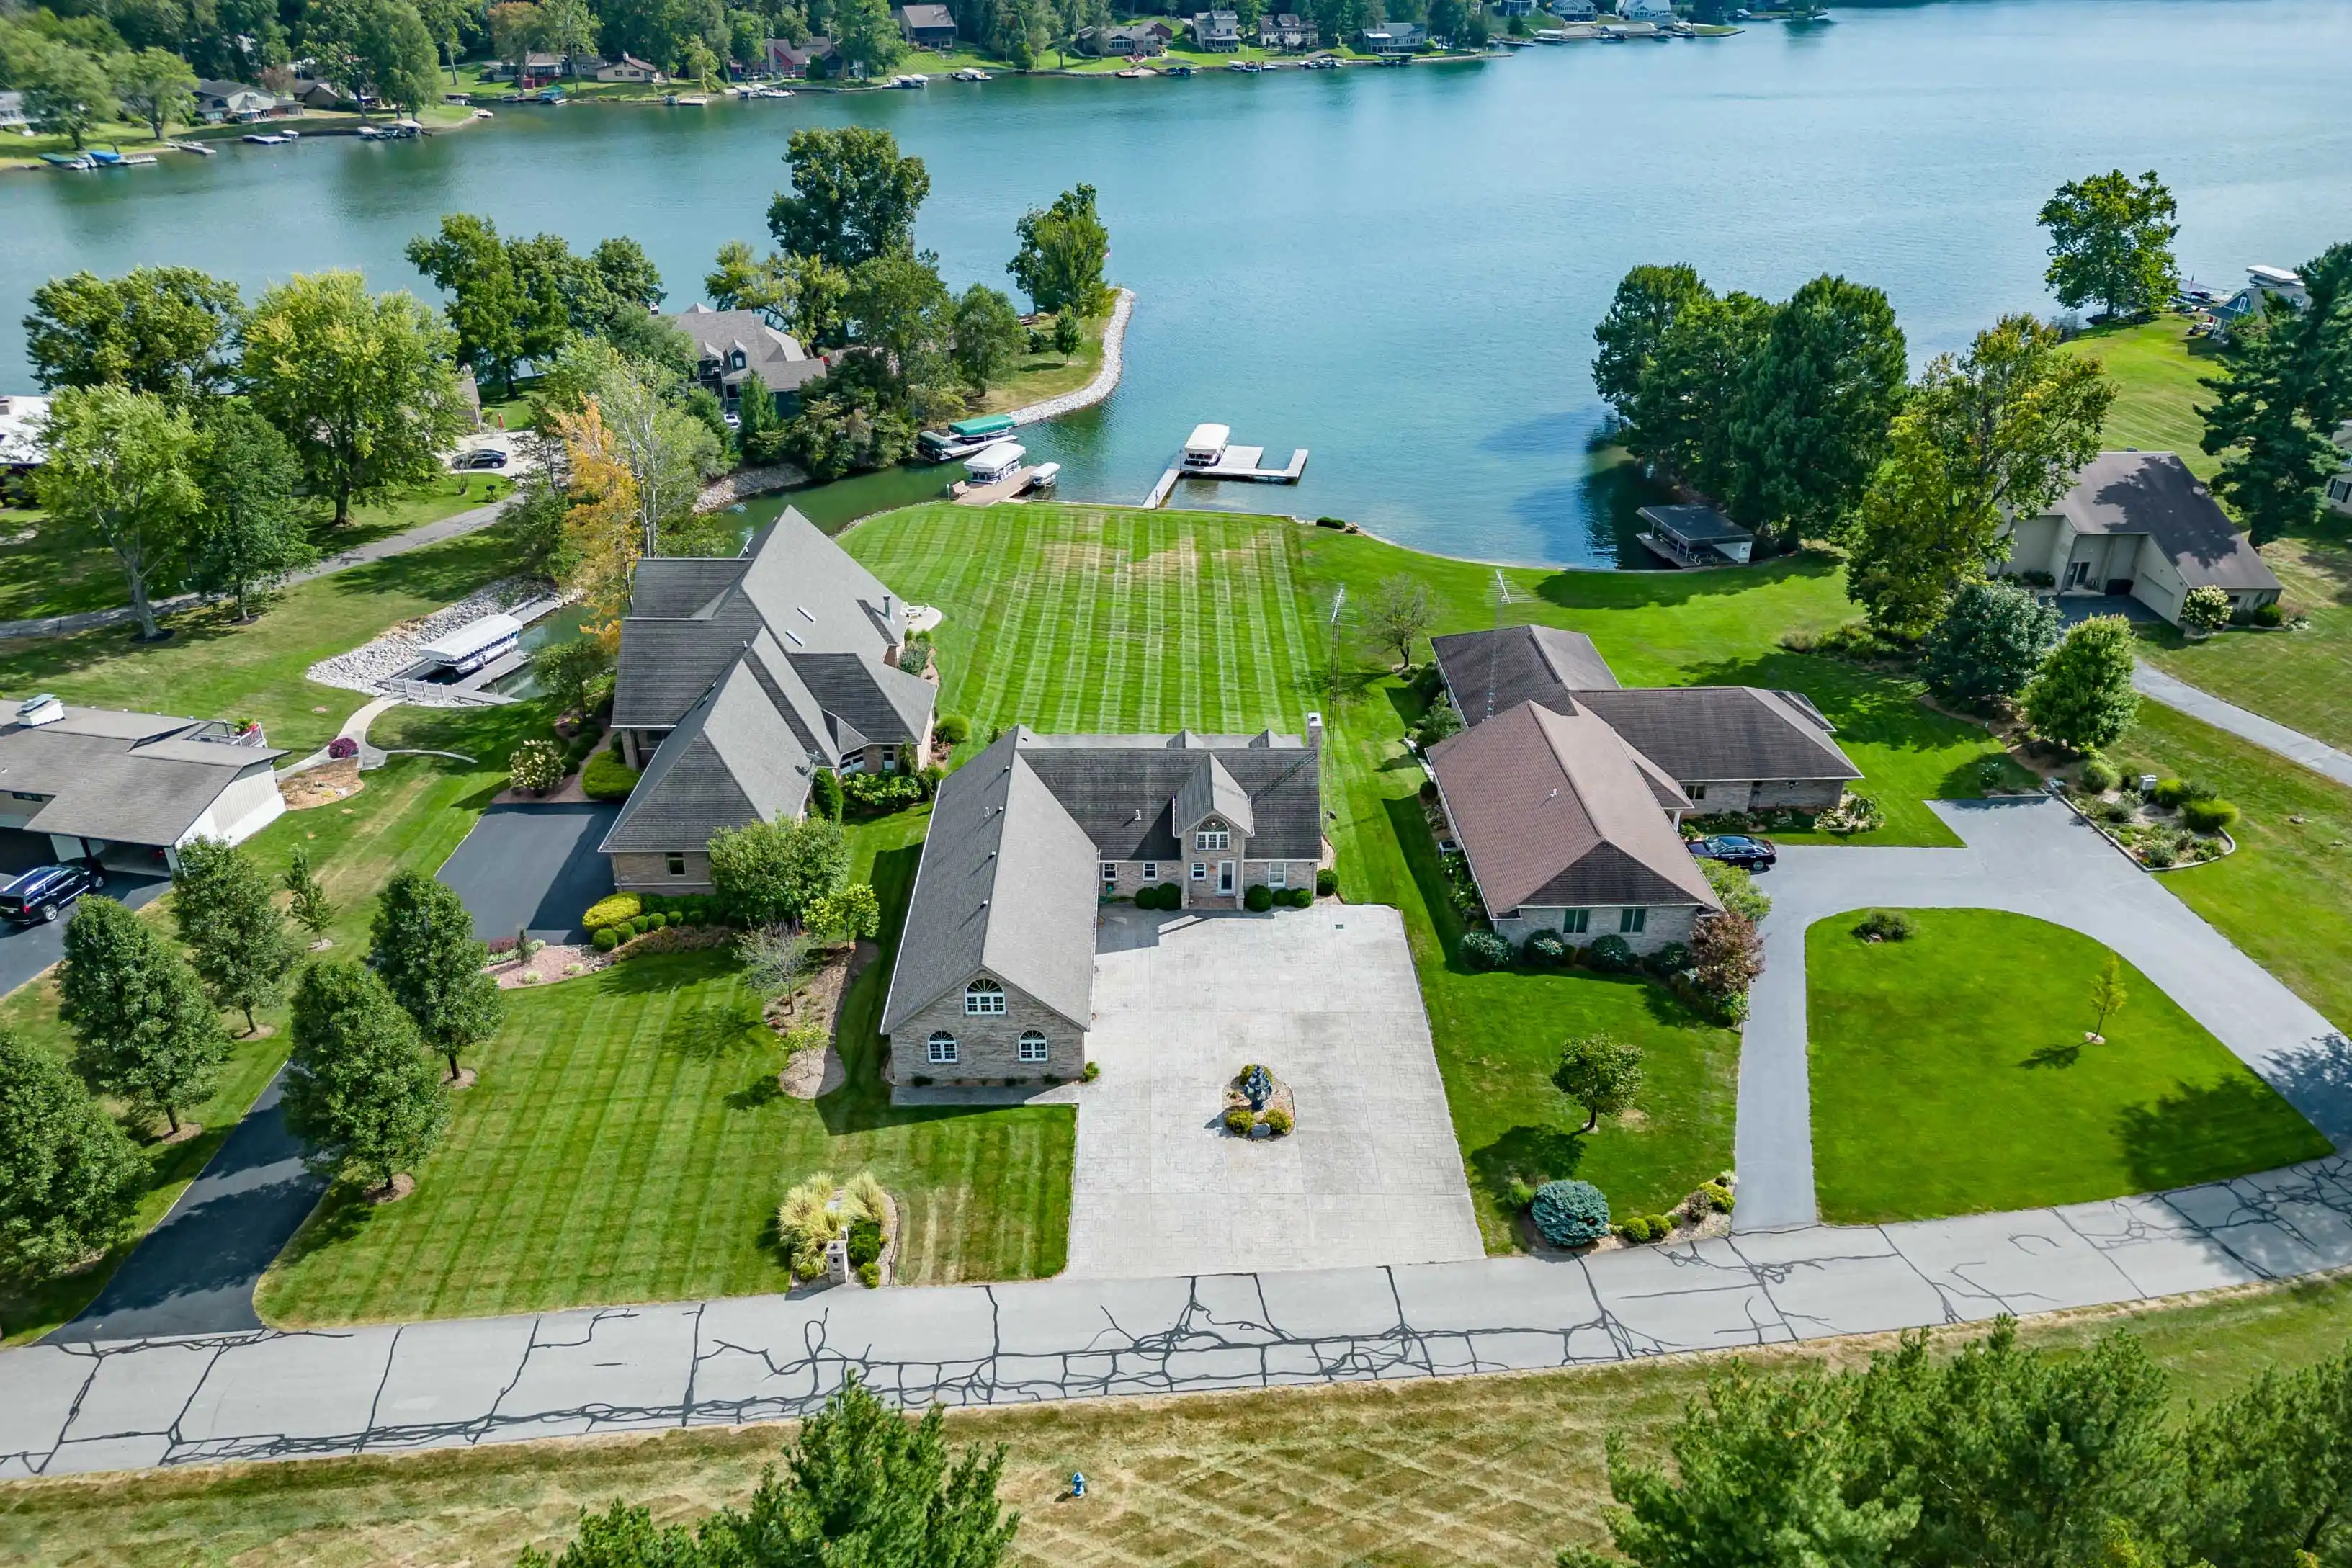 Aerial view of a residential area with manicured lawns, several houses, and a lake with docks and boats.